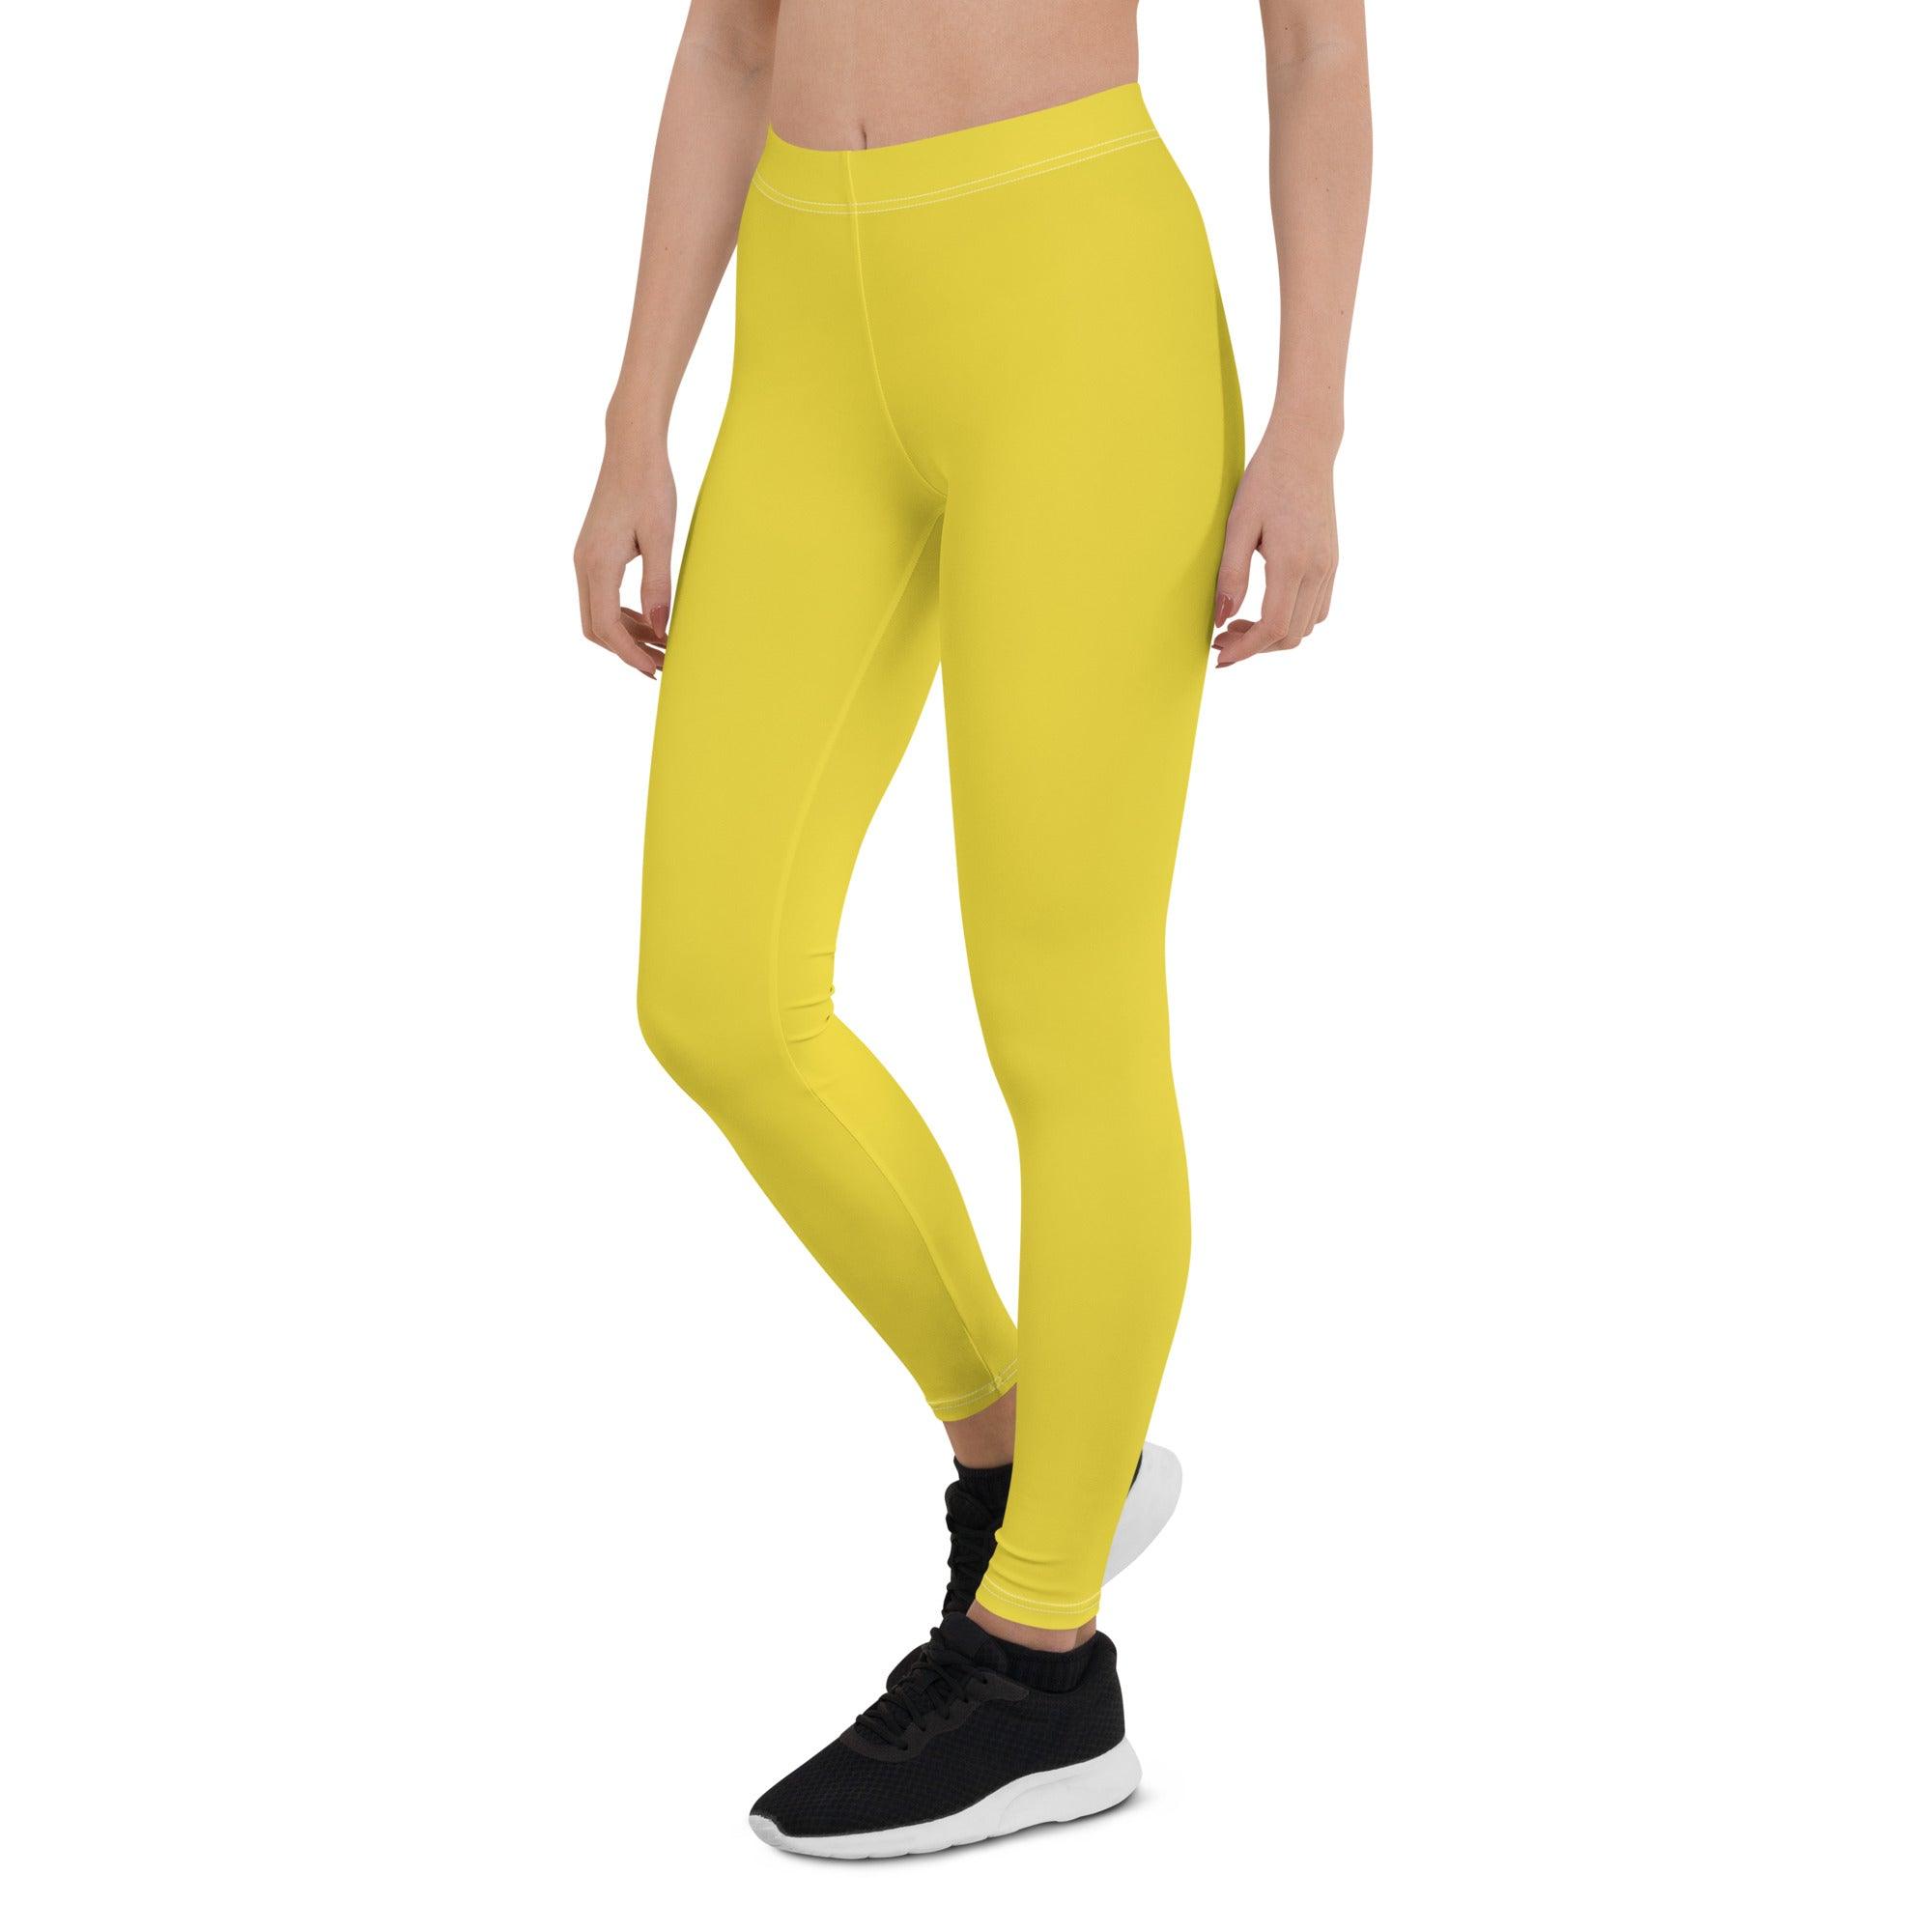 Inela Dream Yellow Mid-Rise Leggings Solid Workout Gym Women's Active Wear Vibrant 